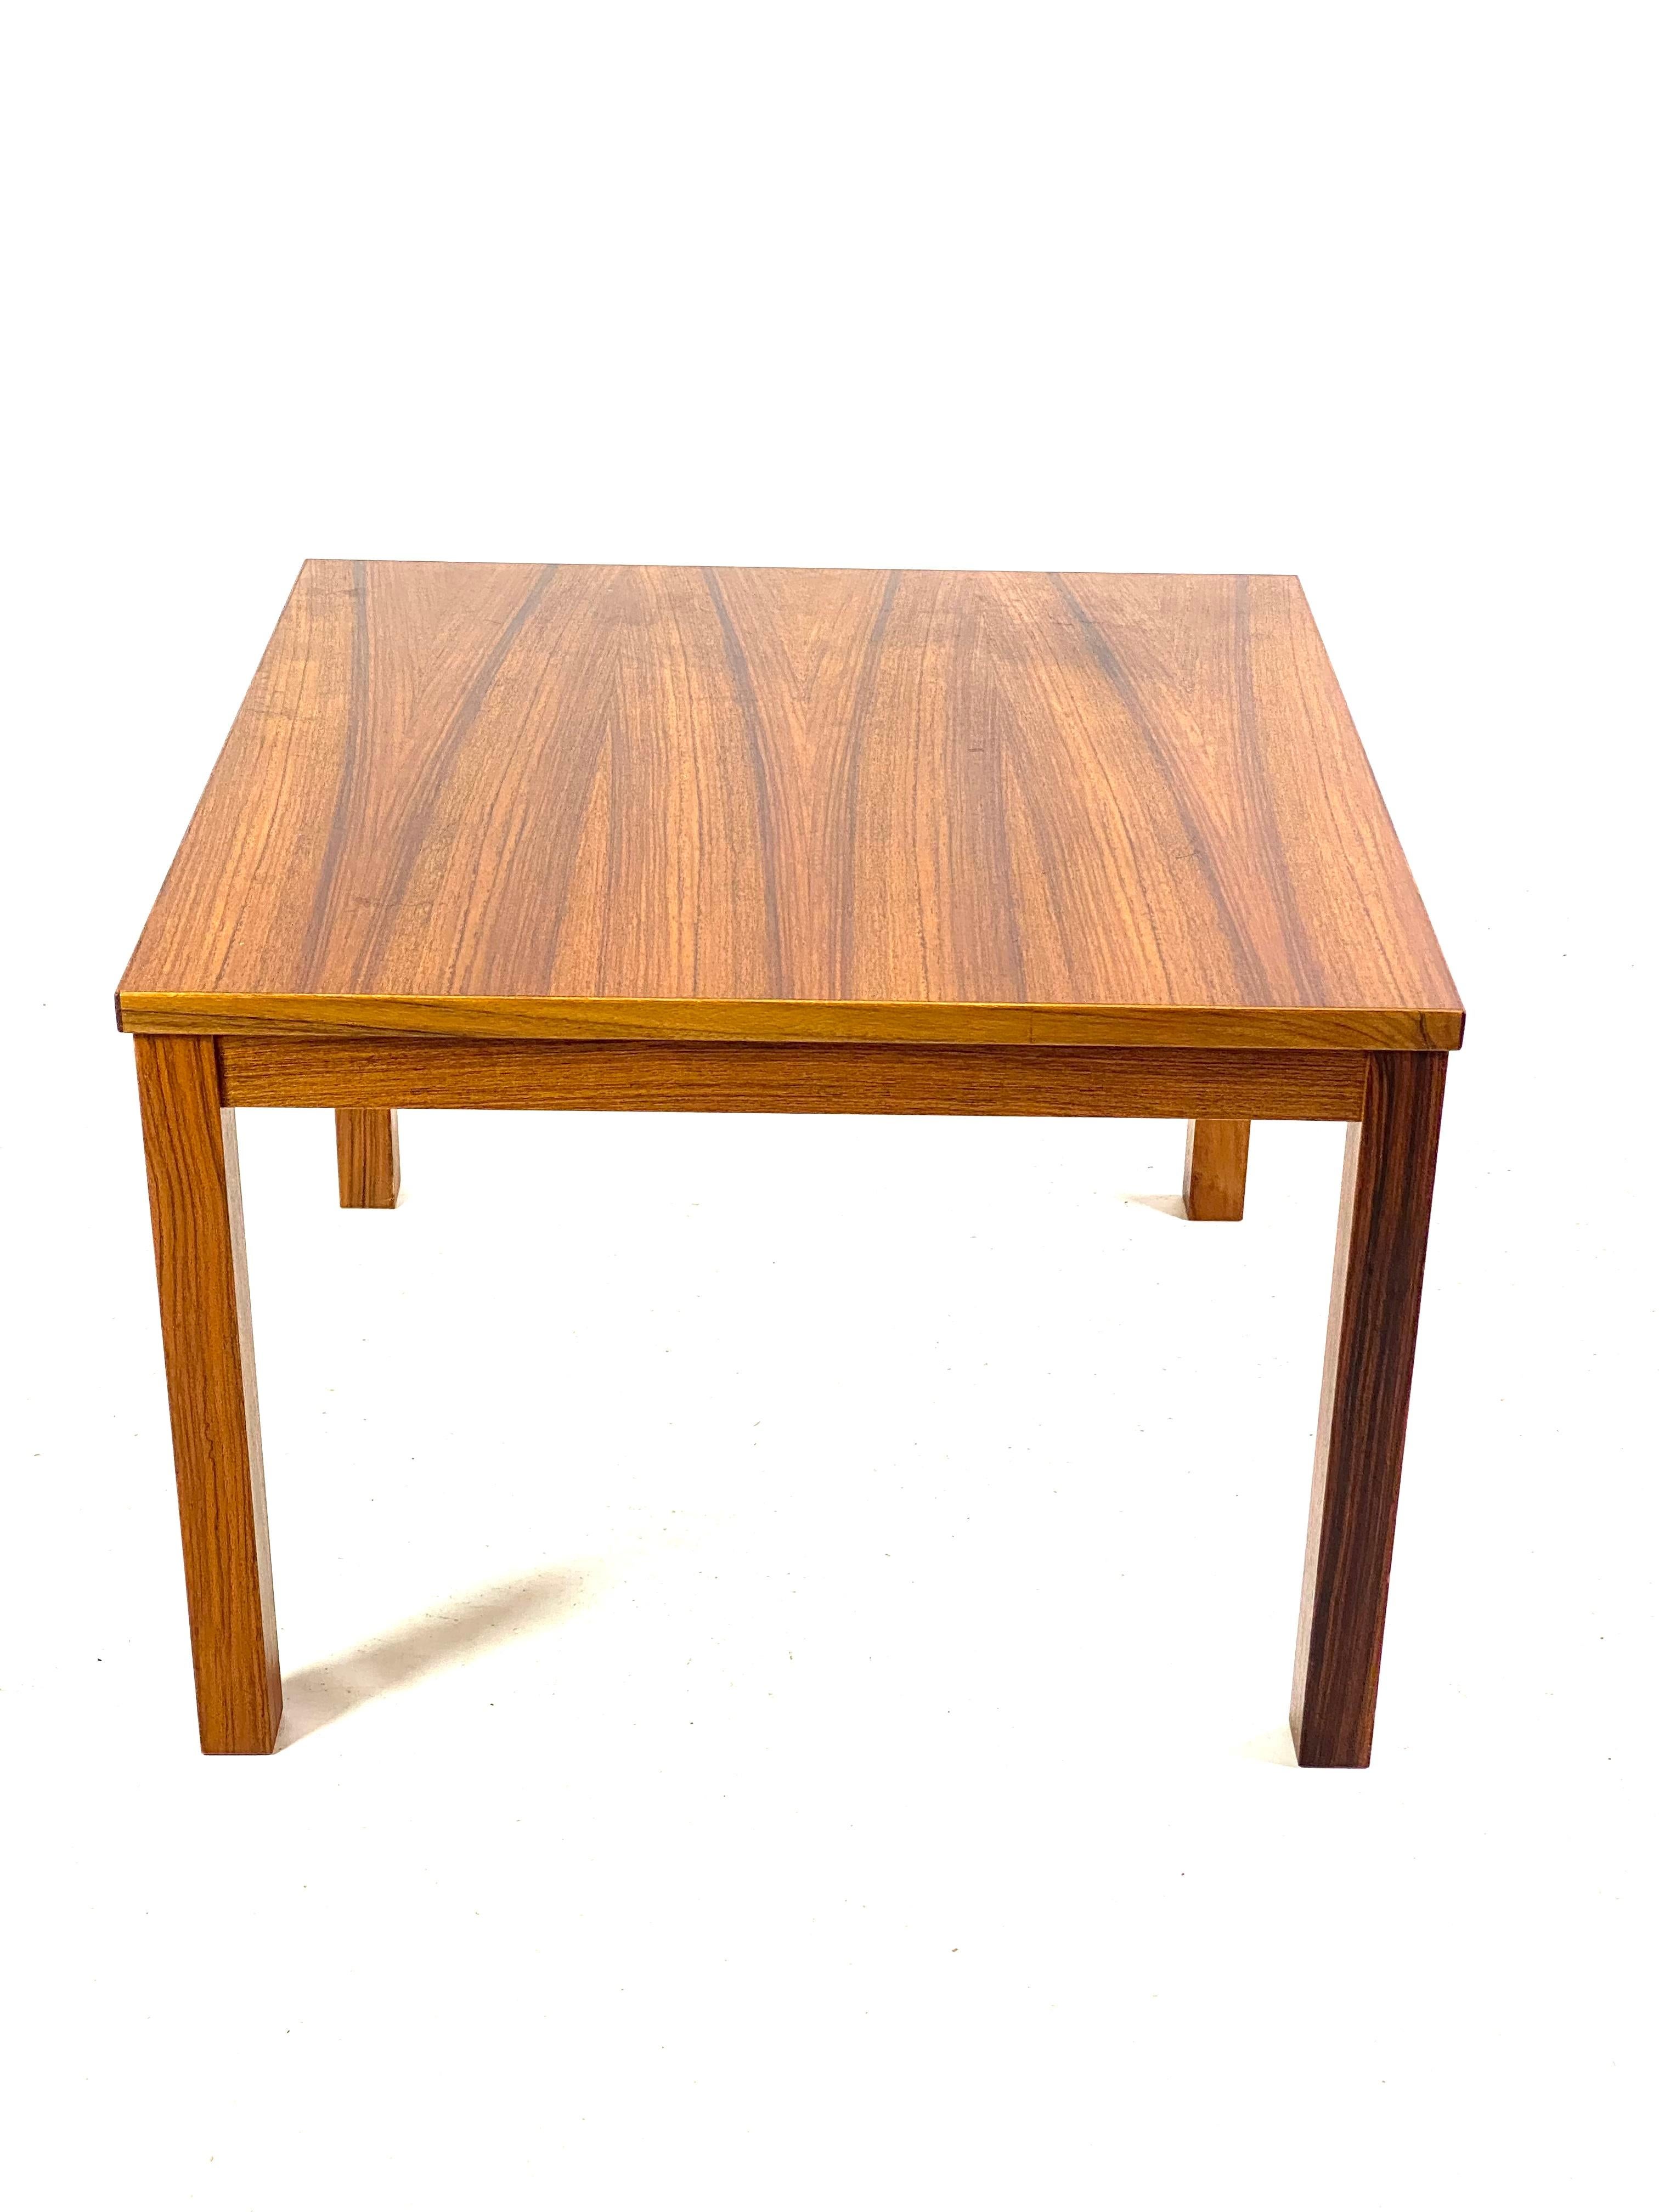 Mid-20th Century Coffee Table in Rosewood of Danish Design from the 1960s For Sale